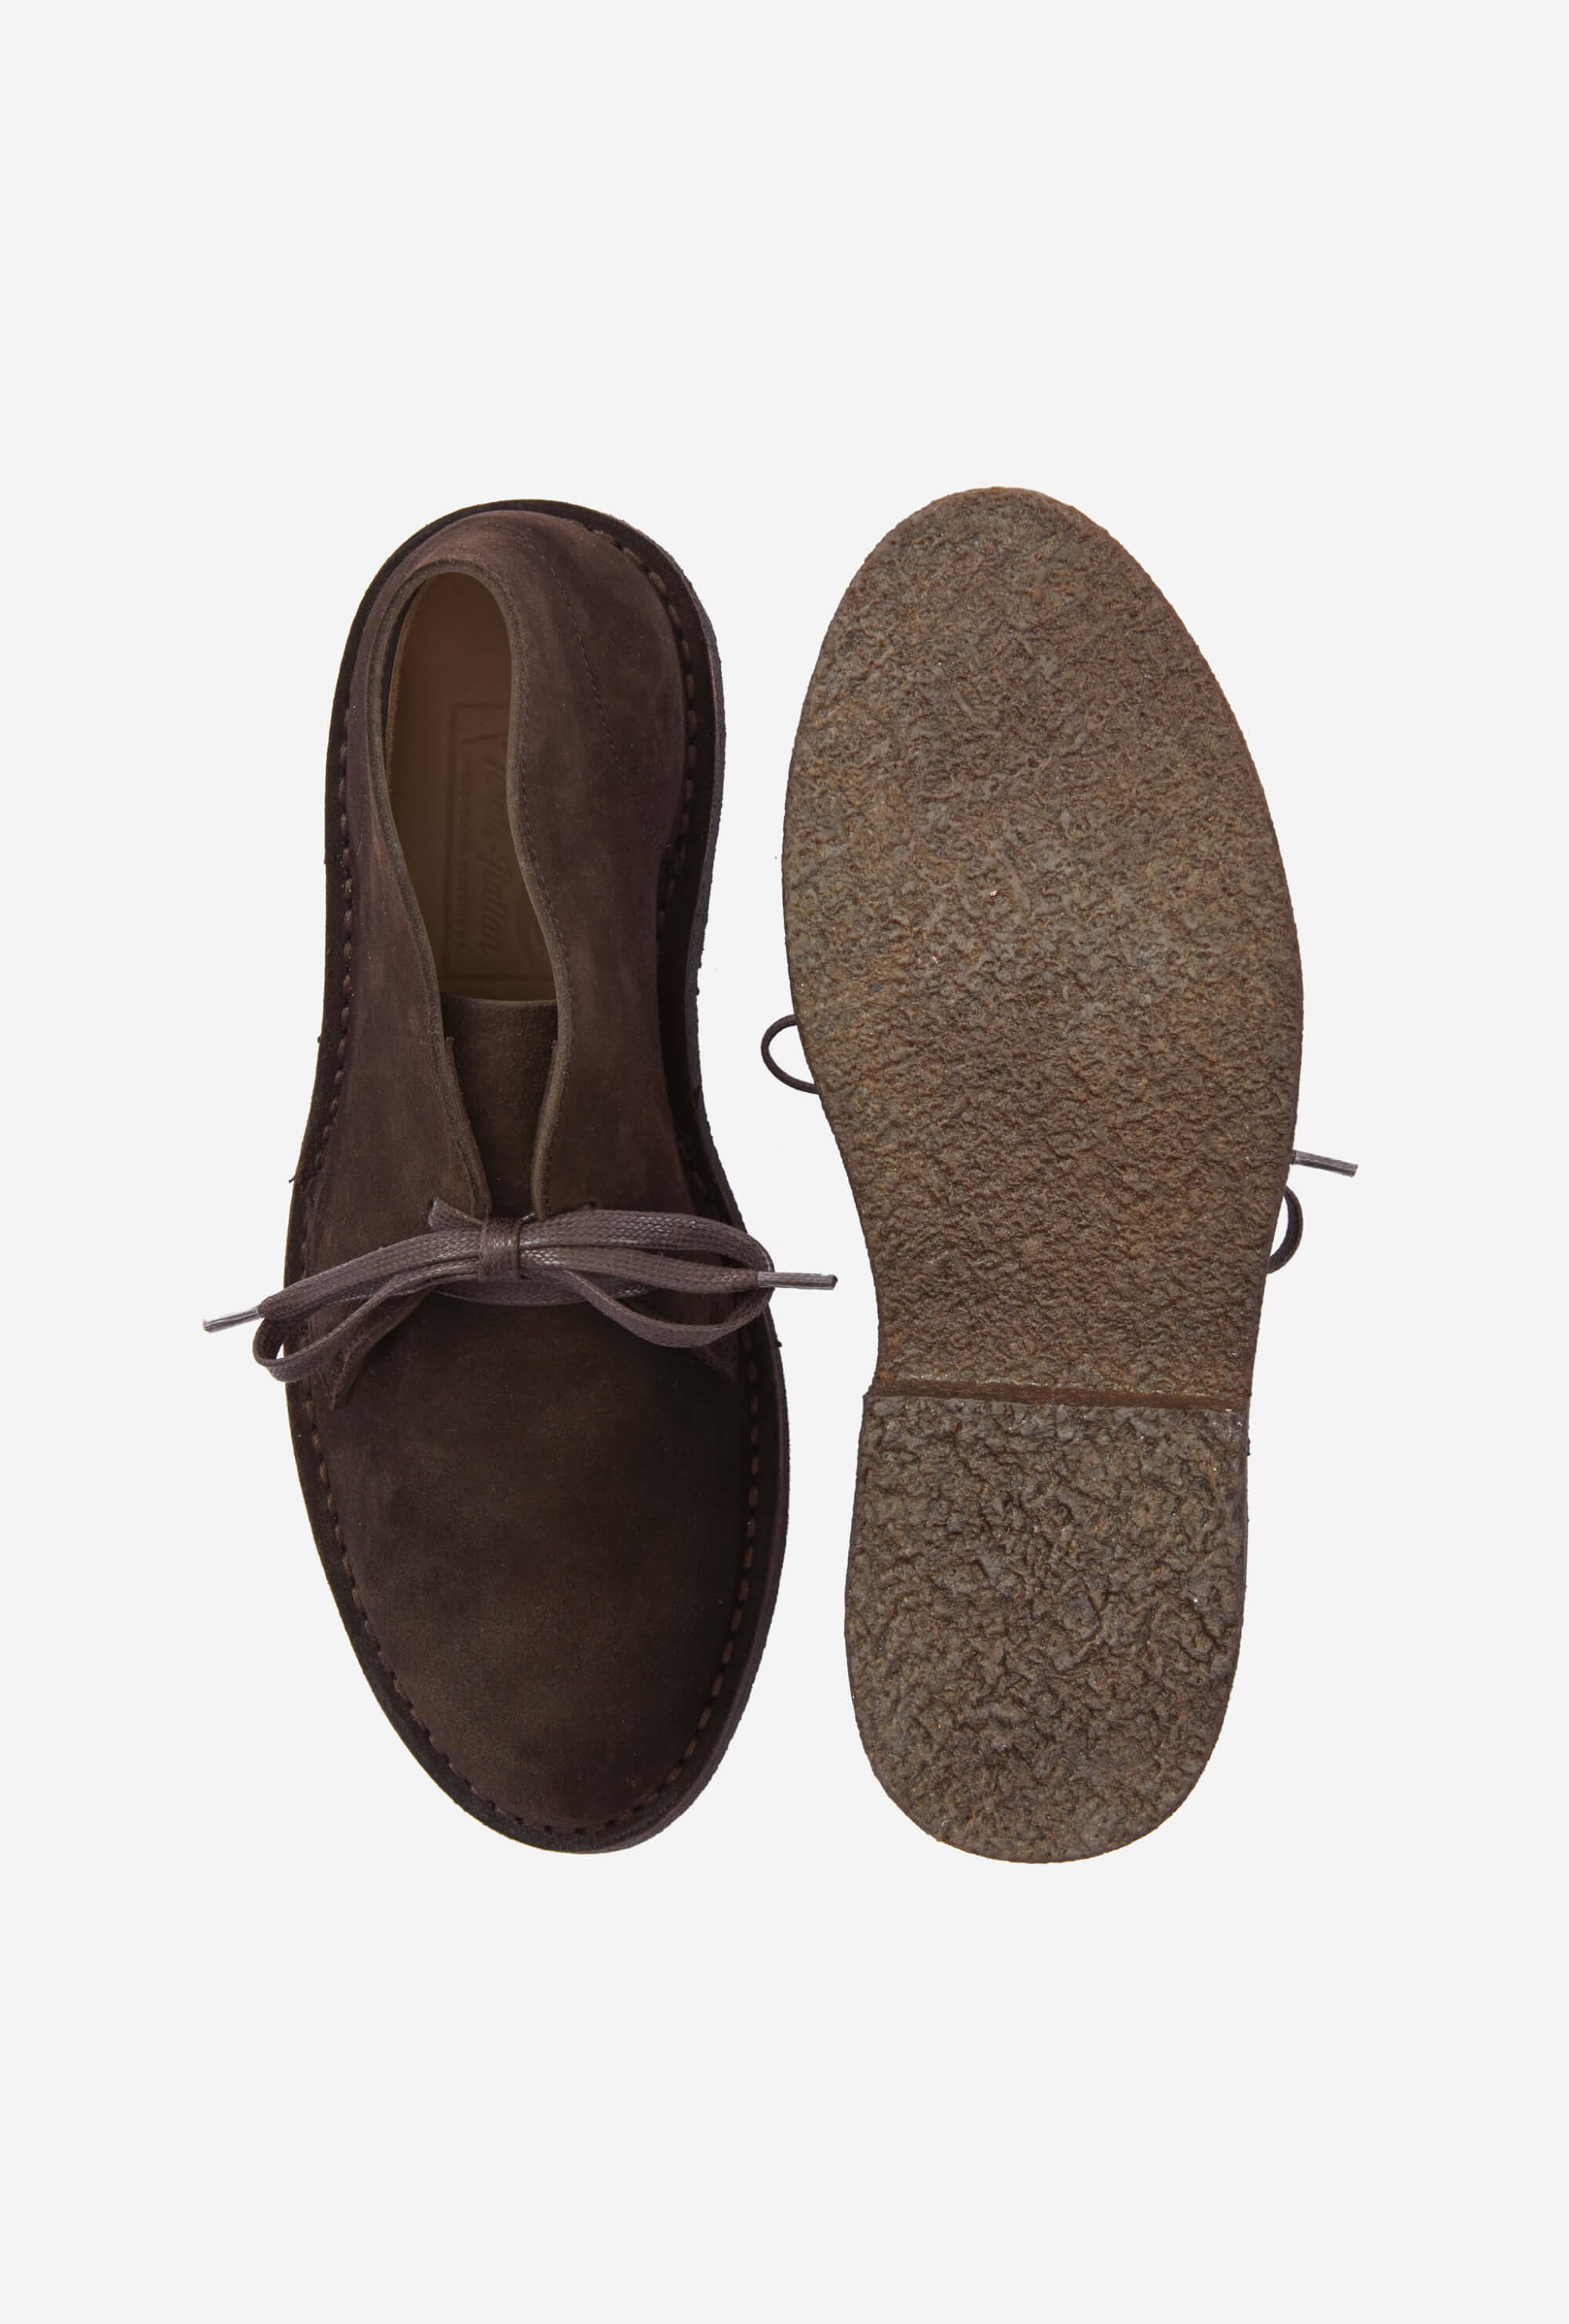 Desert Boot Crepe Sole Chocolate Suede